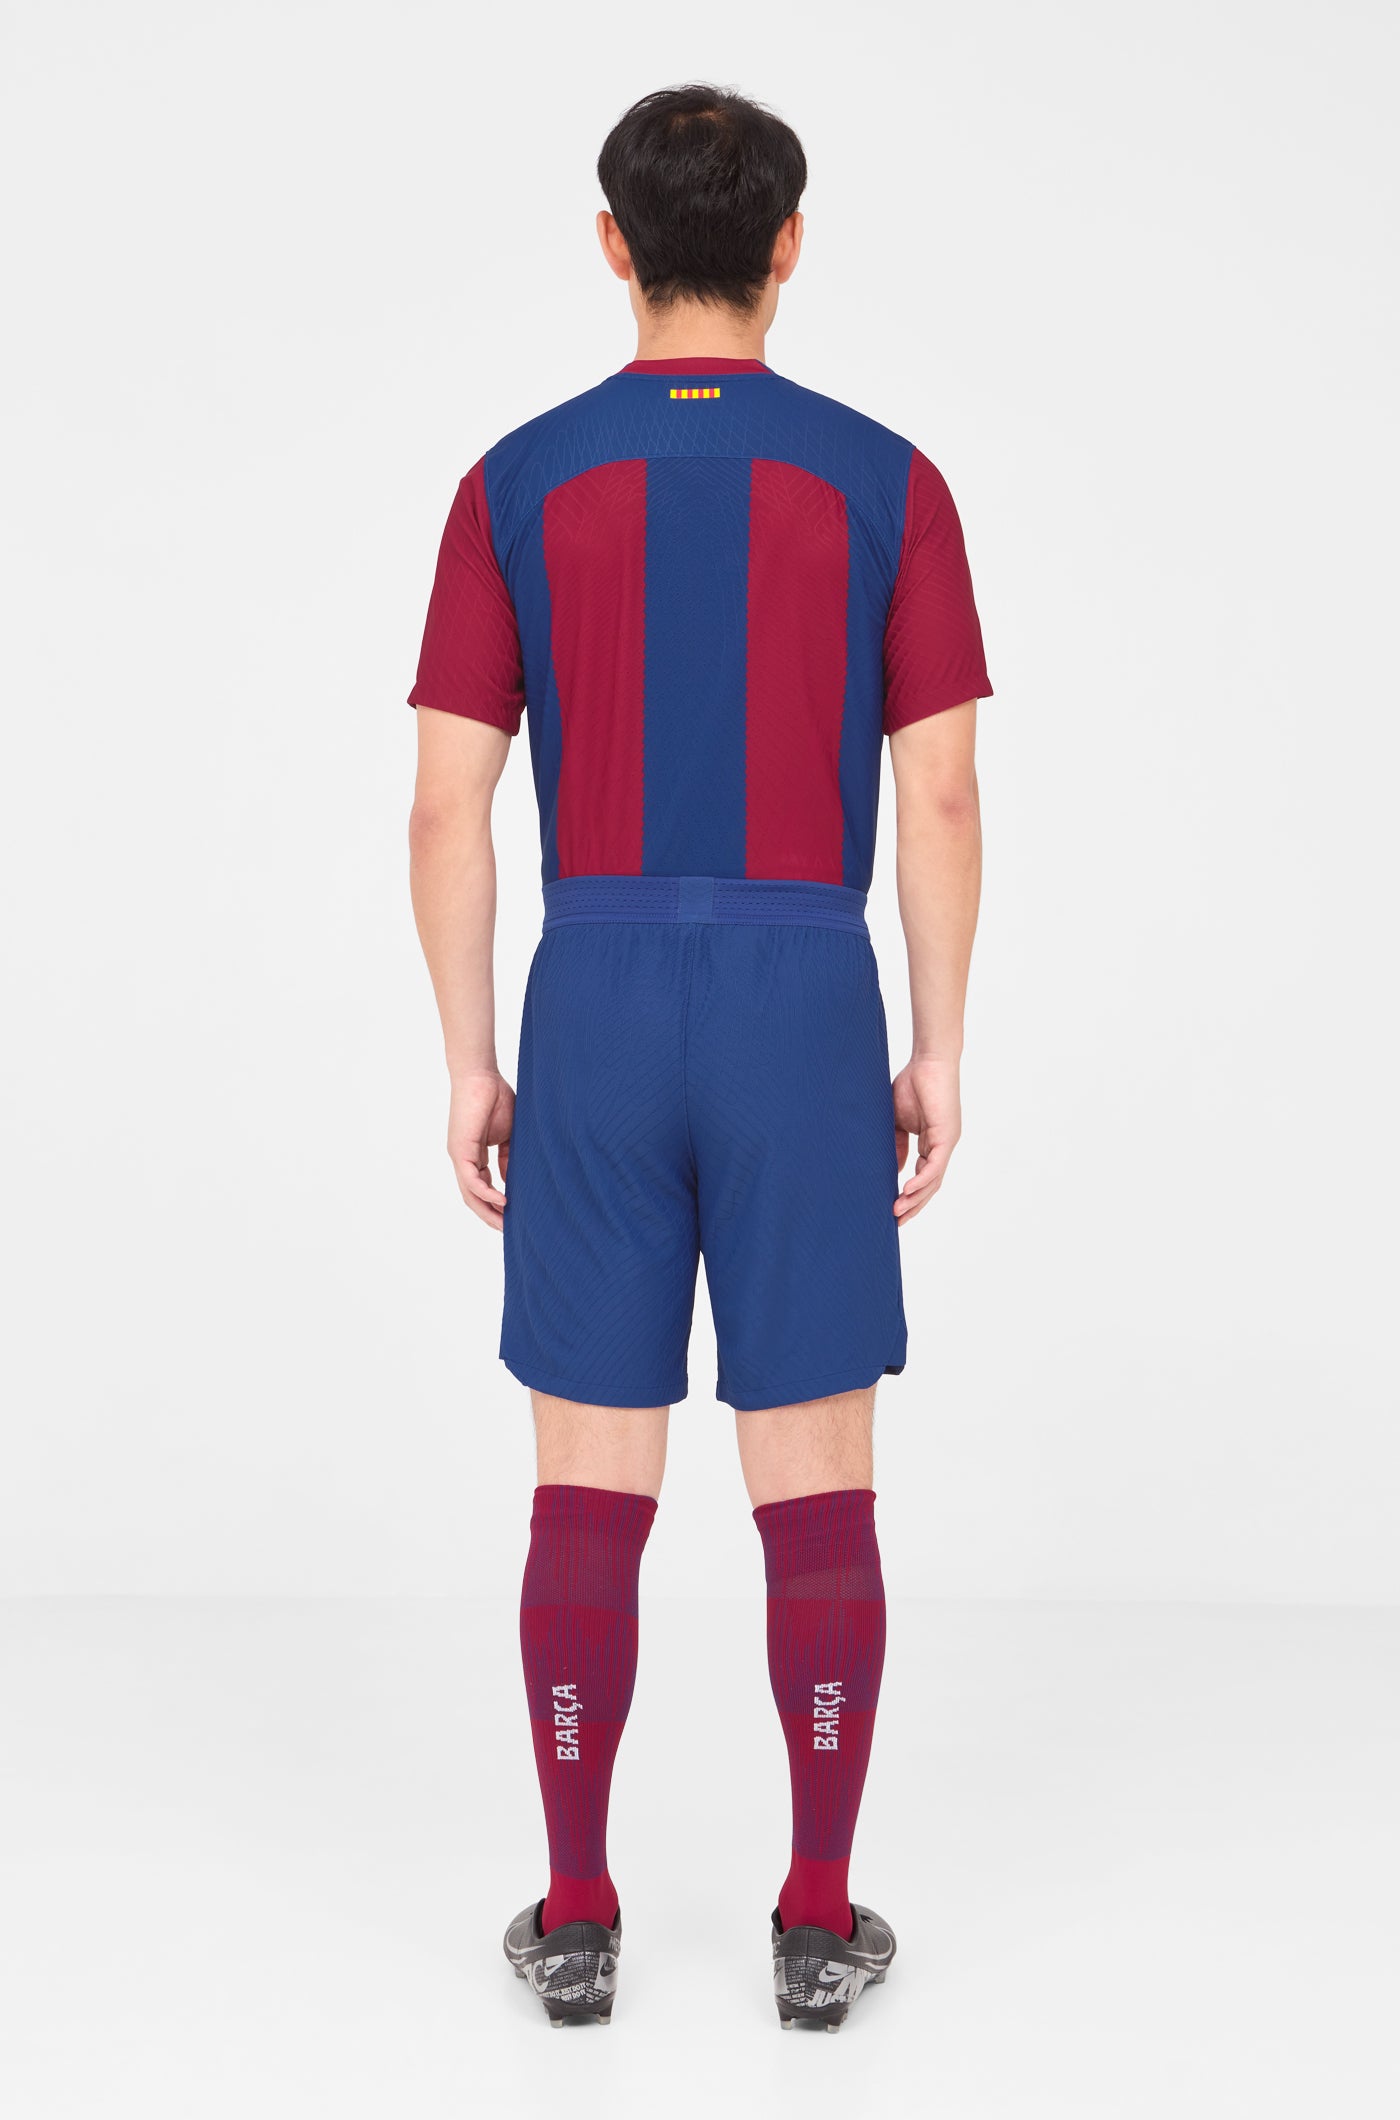 FC Barcelona home short 23/24 Player's Edition